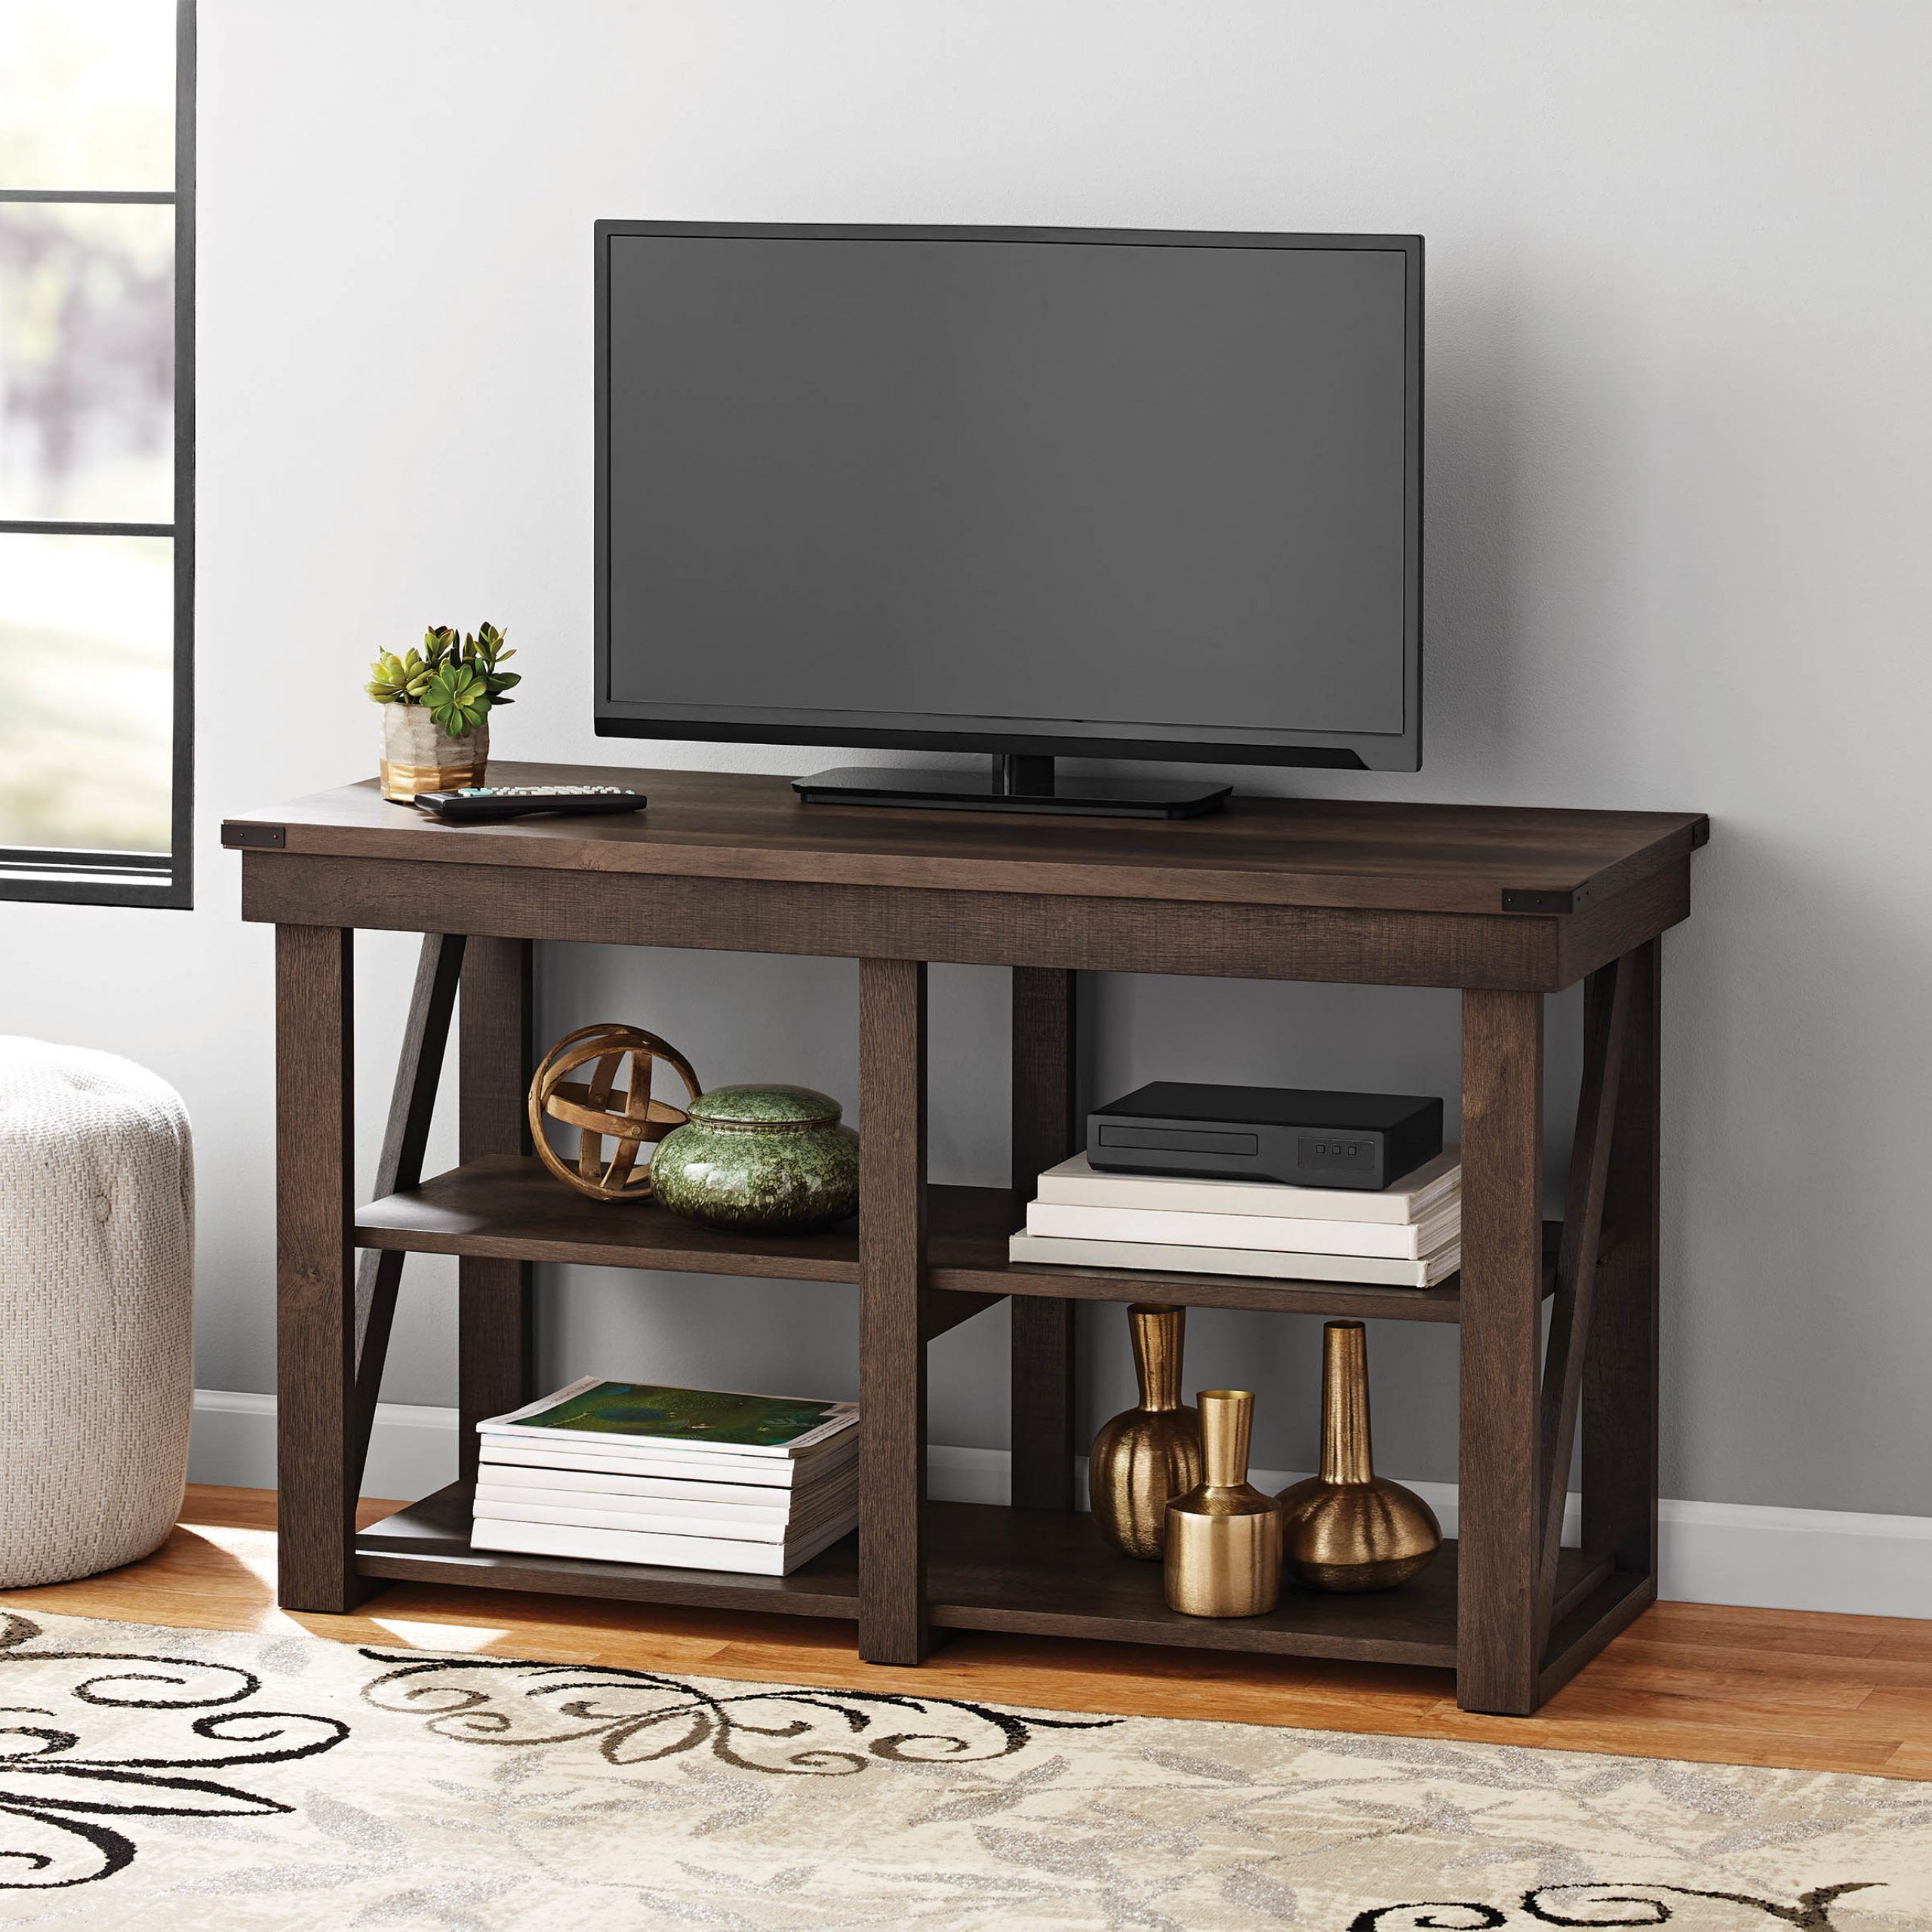 Flat Screen Tv Stand At Walmart — Shermanscreek Within Whalen Shelf Tv Stands With Floater Mount In Weathered Dark Pine Finish (Photo 3 of 15)